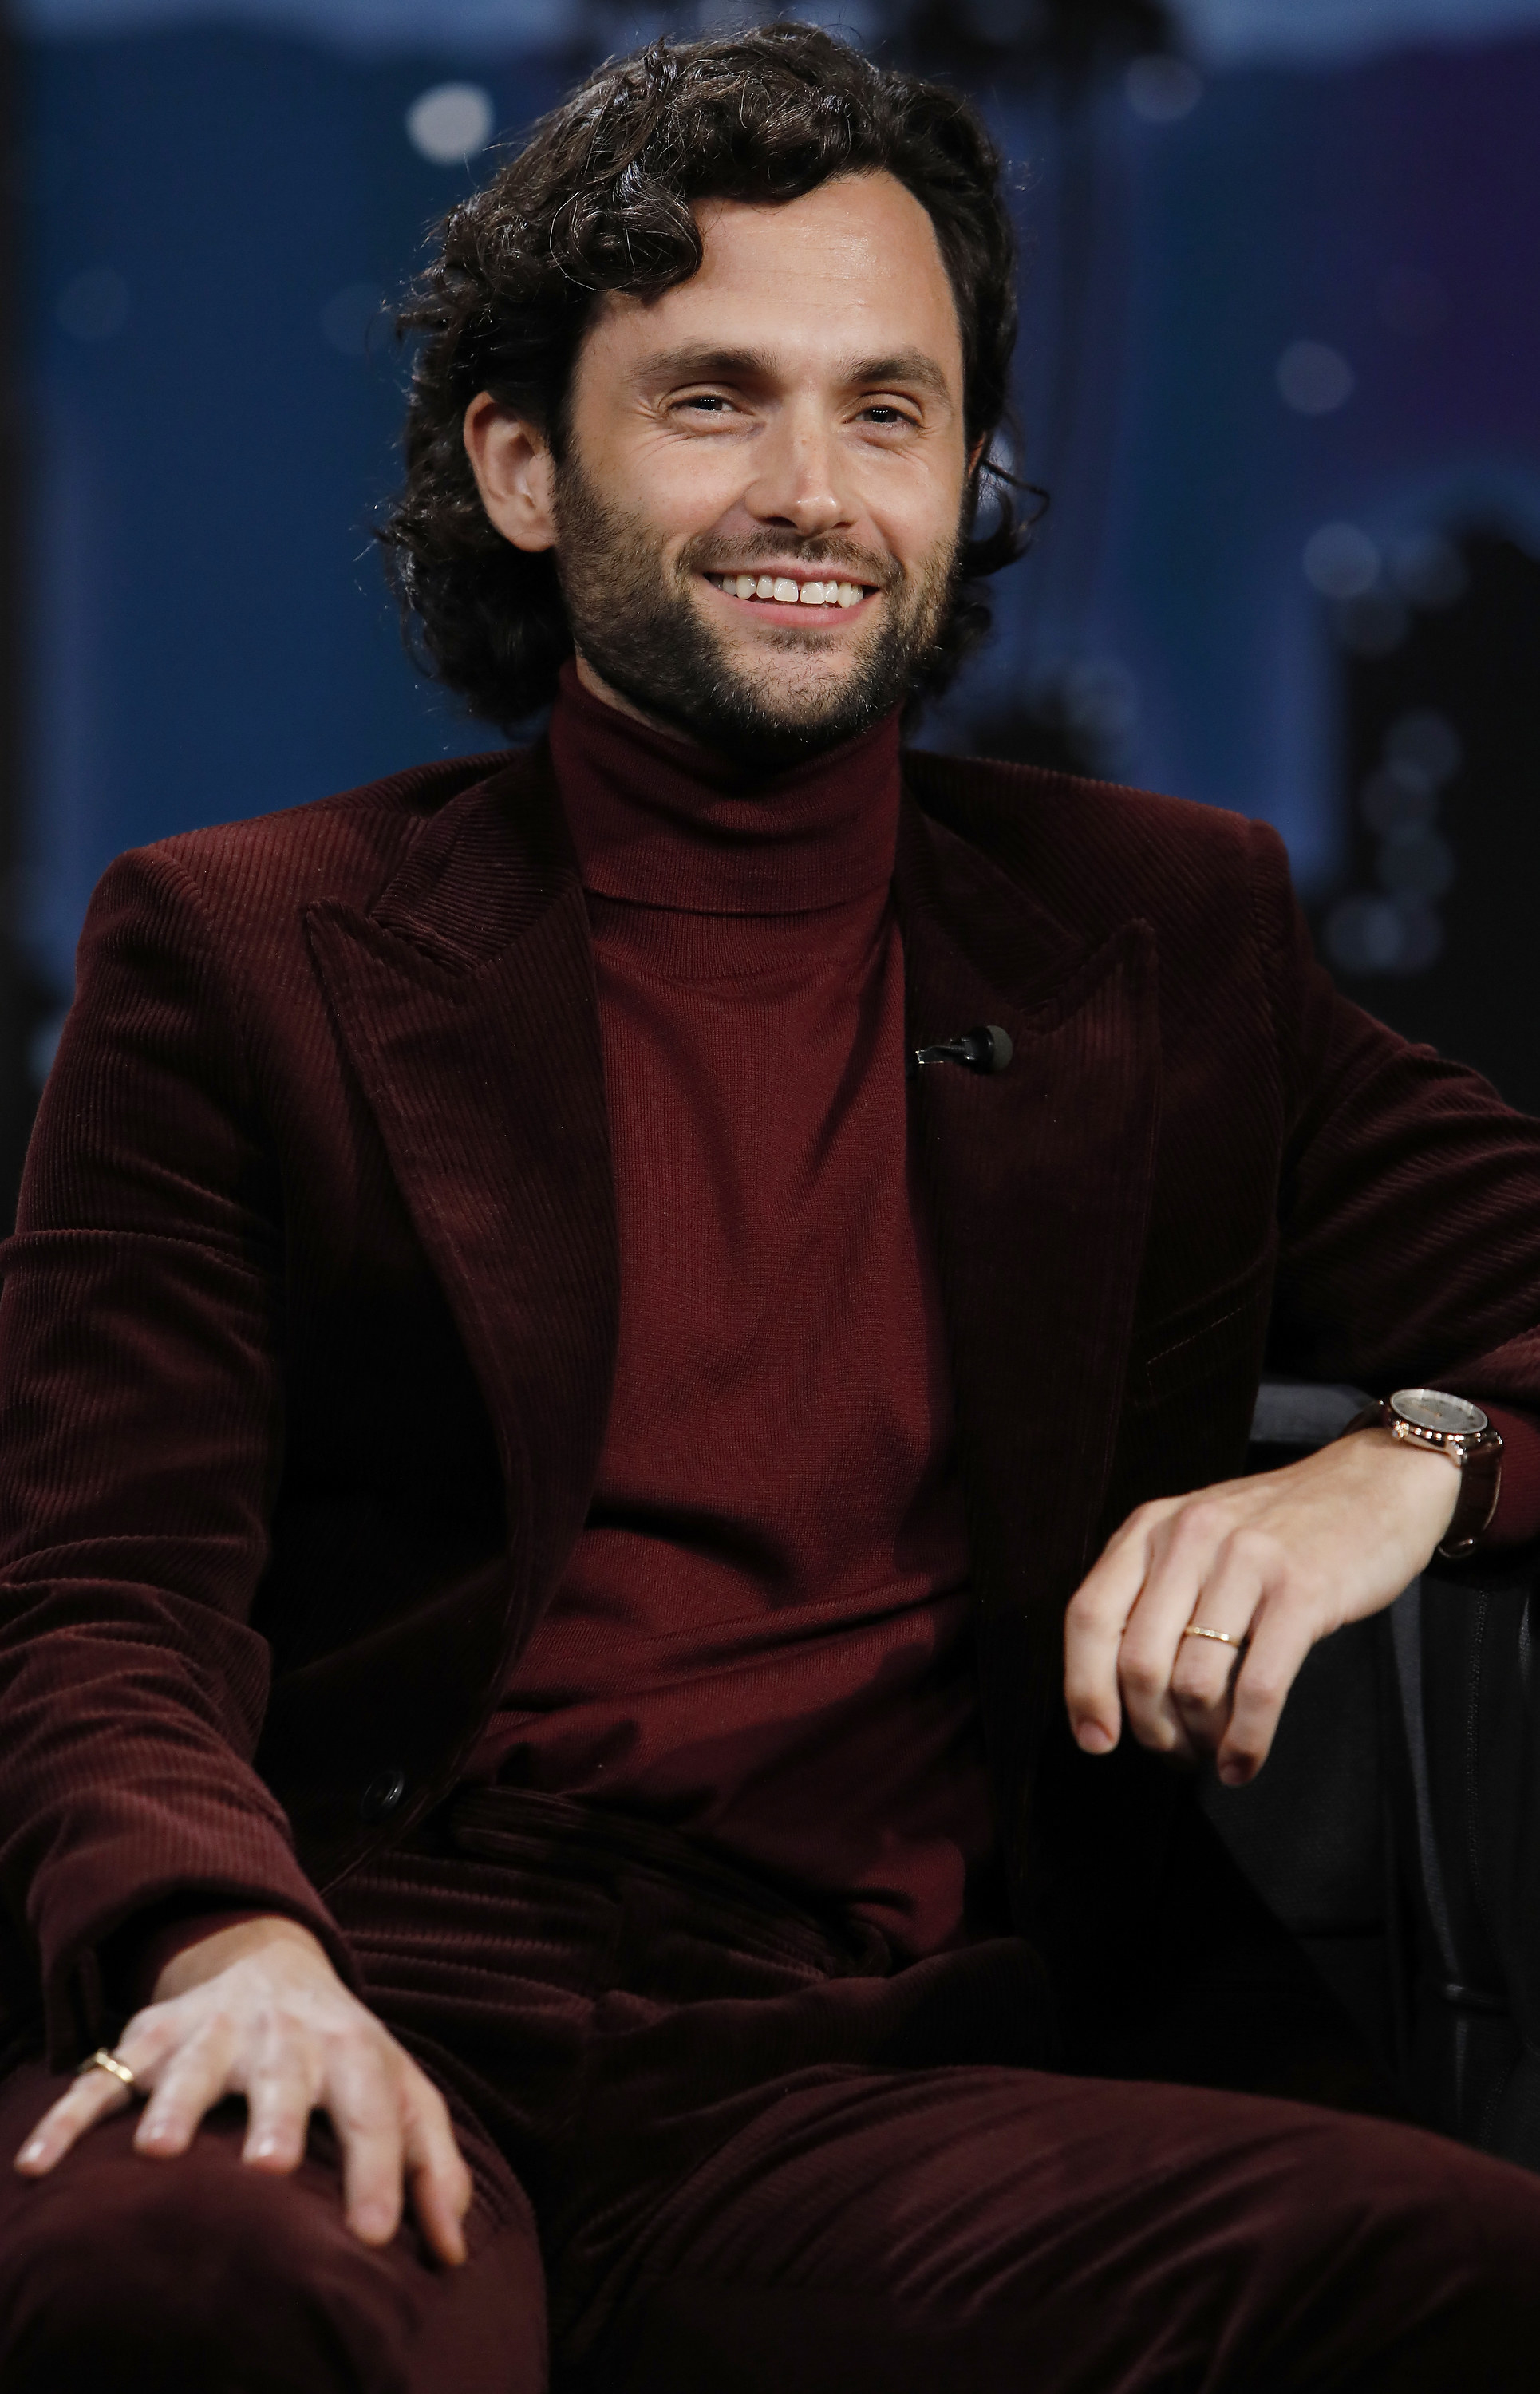 Penn Badgley smiles as he sits in as a guest on &quot;Jimmy Kimmel Live!&quot; in October 2021